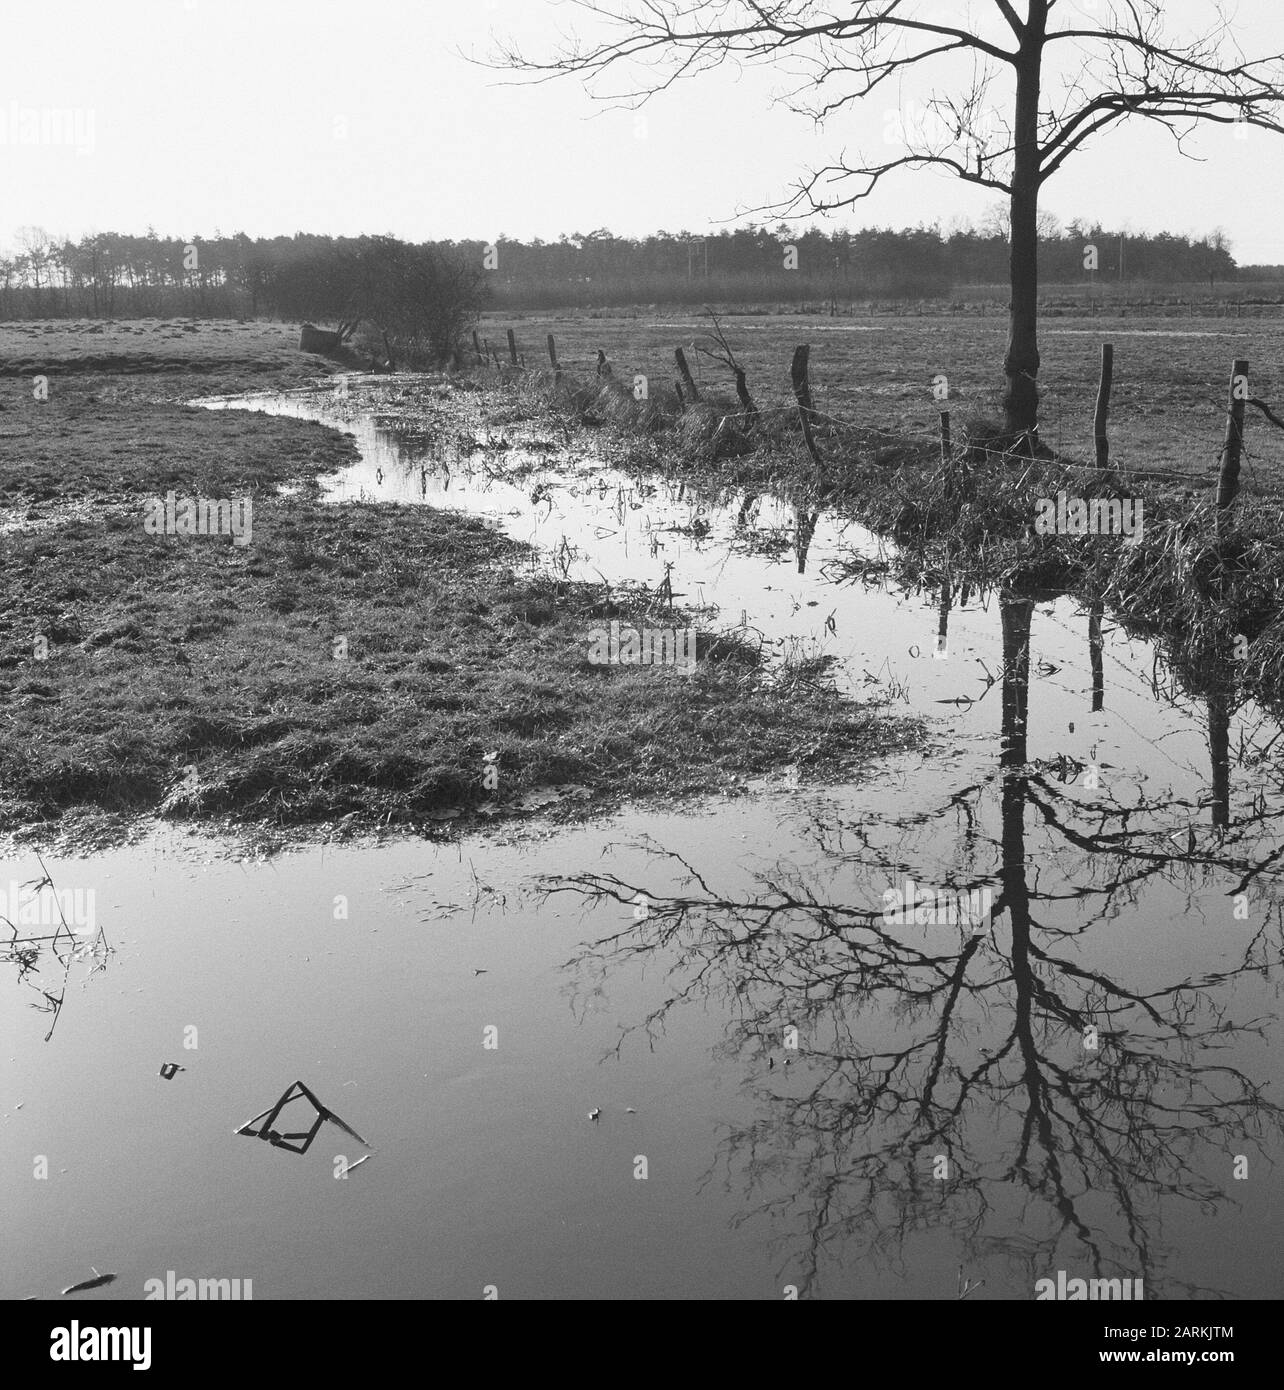 box III/near castle nemelaer/railline eindhoven - tilburg Date: february 1964 Keywords: divers and gardening, digging and dampening ditches, canals, laying sewerage, swampy, normalization of streams, railway lines, terrain Personal name: land consolidation essche stream Stock Photo